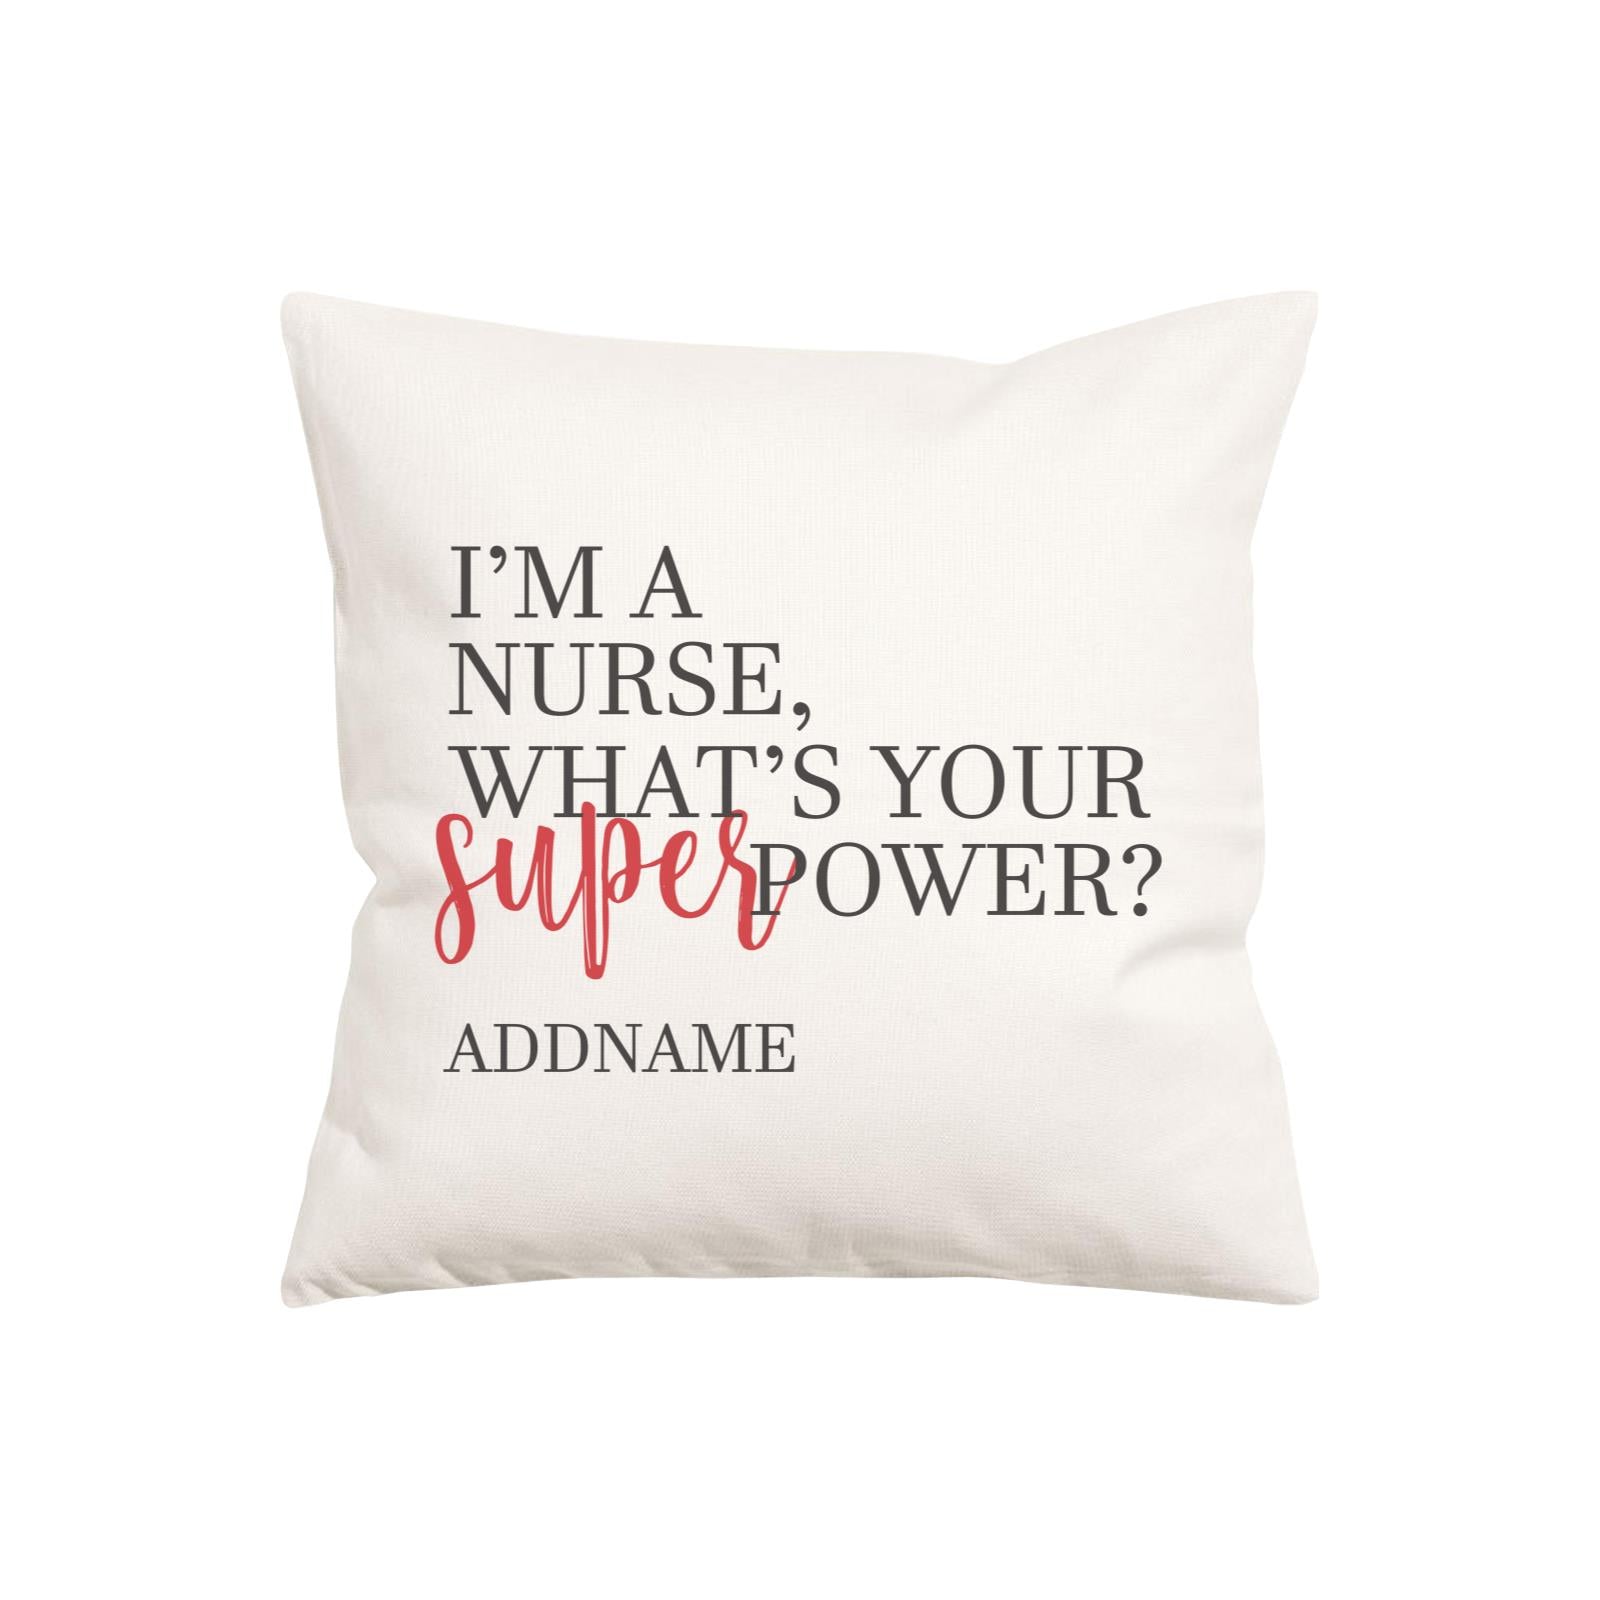 I'm A Nurse, What's Your Superpower Pillow Cushion